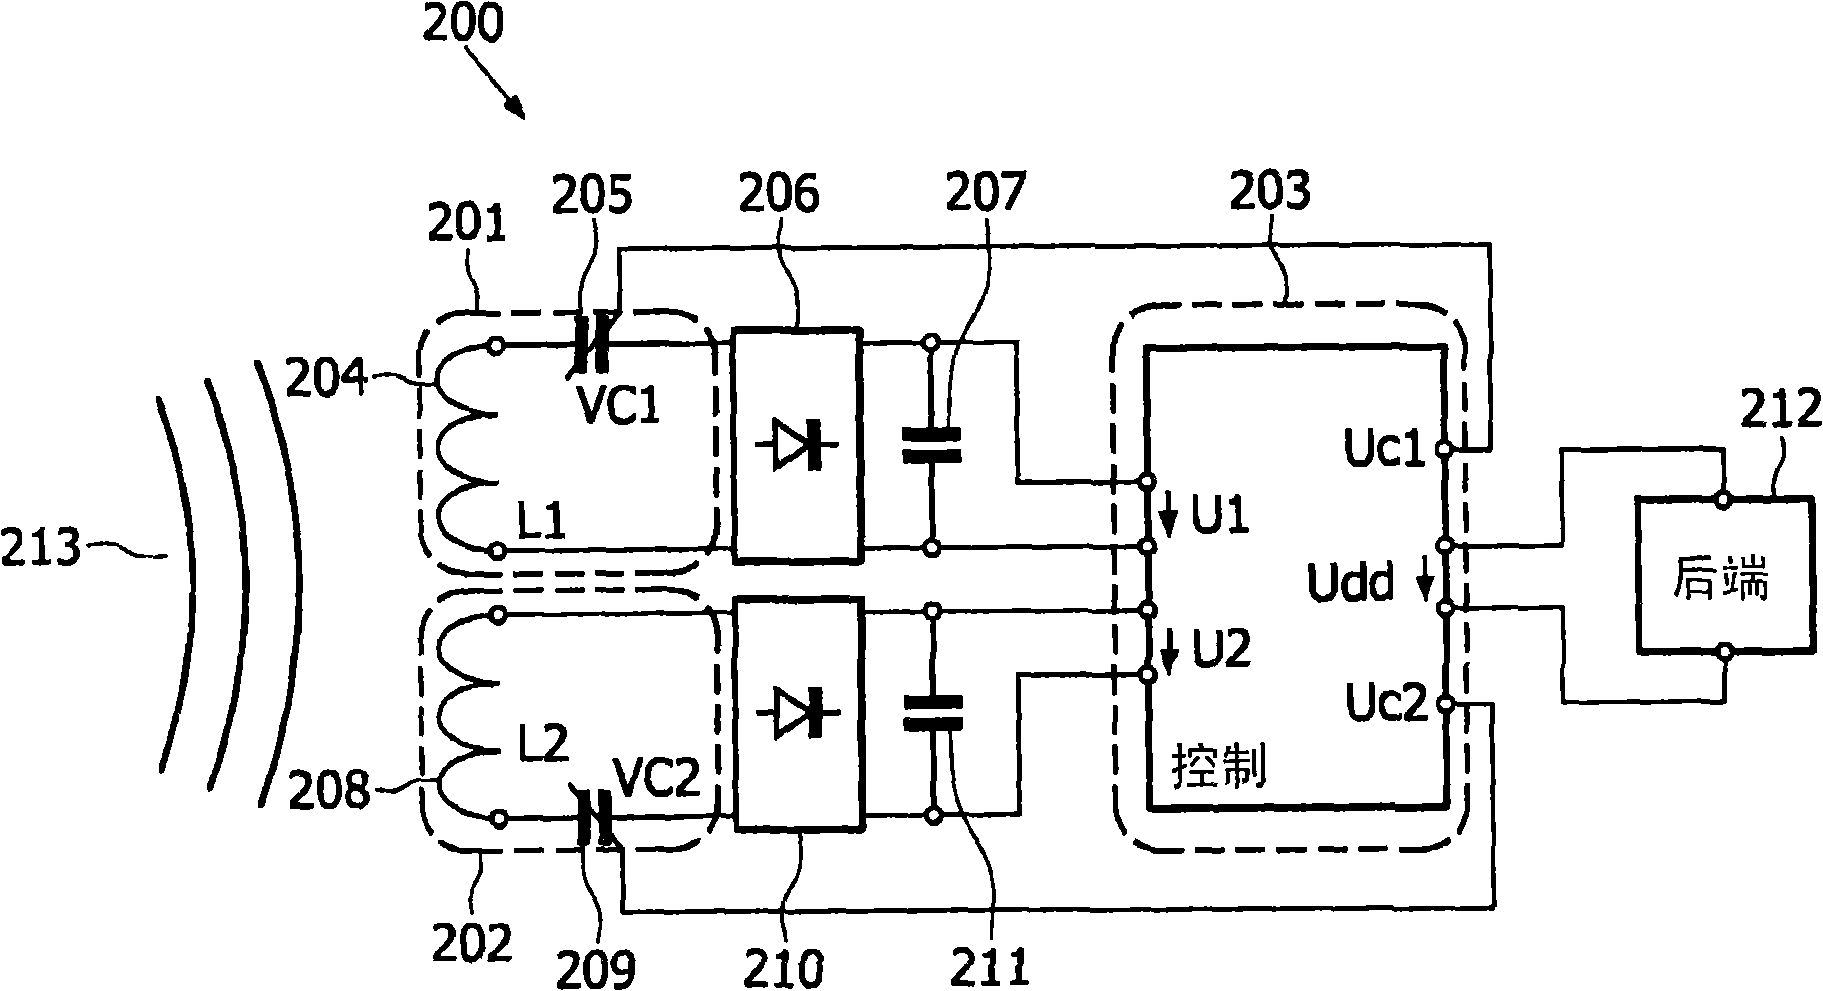 Circuit arrangement for a transponder and method for operating a circuit arrangement